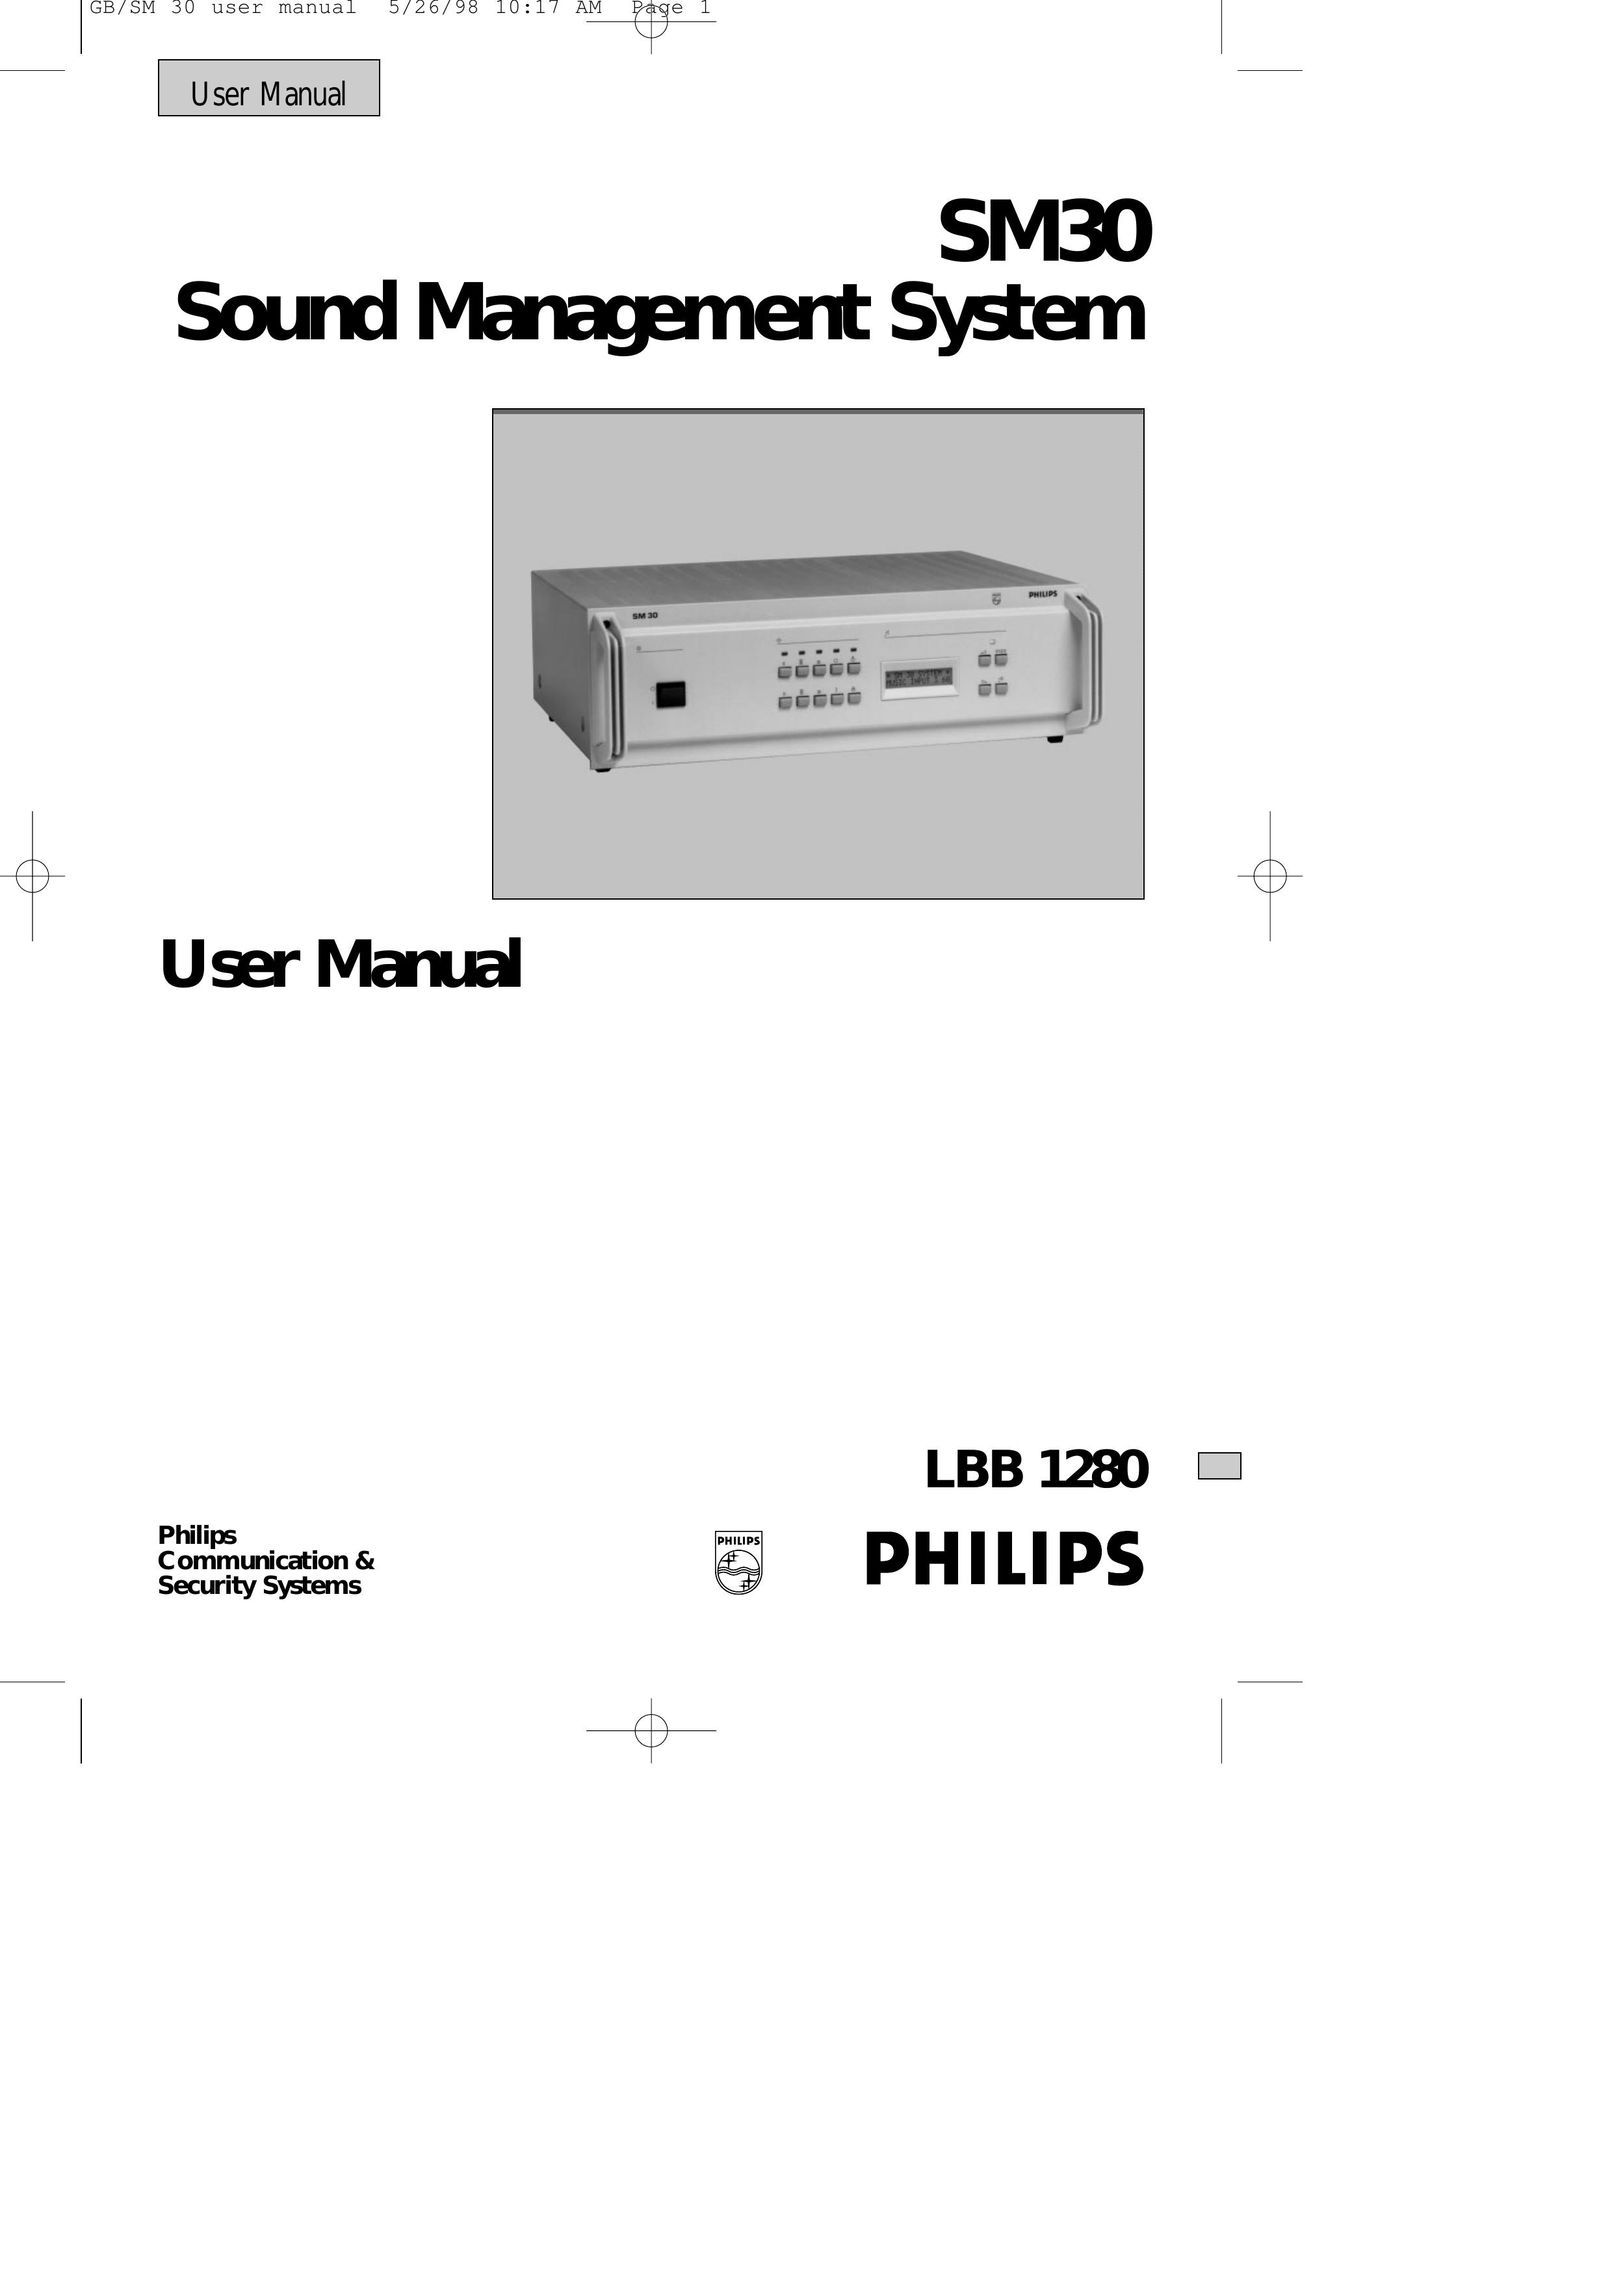 Philips SM30 Video Game Sound System User Manual